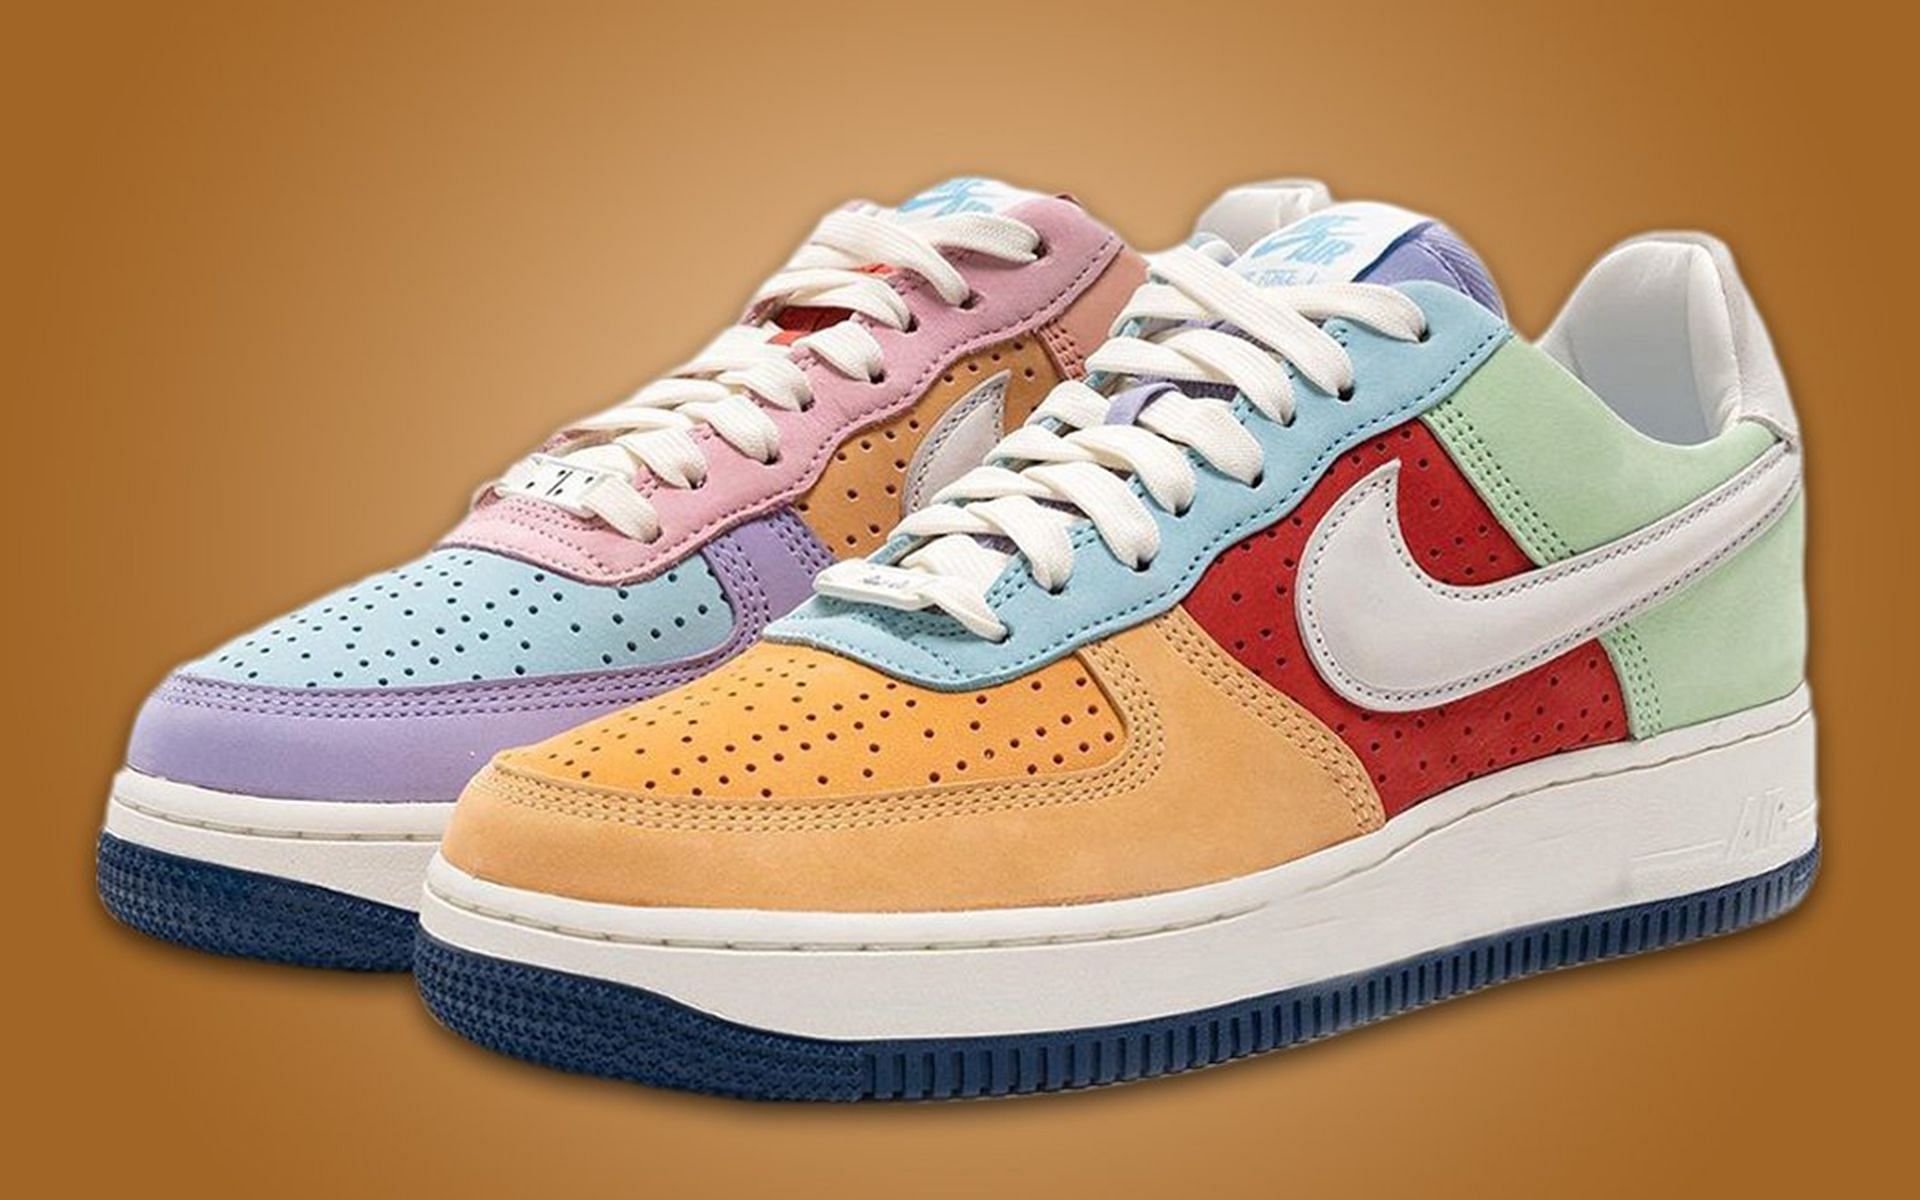 Where to buy Nike Air Force 1 Low Boricua shoes? Release date